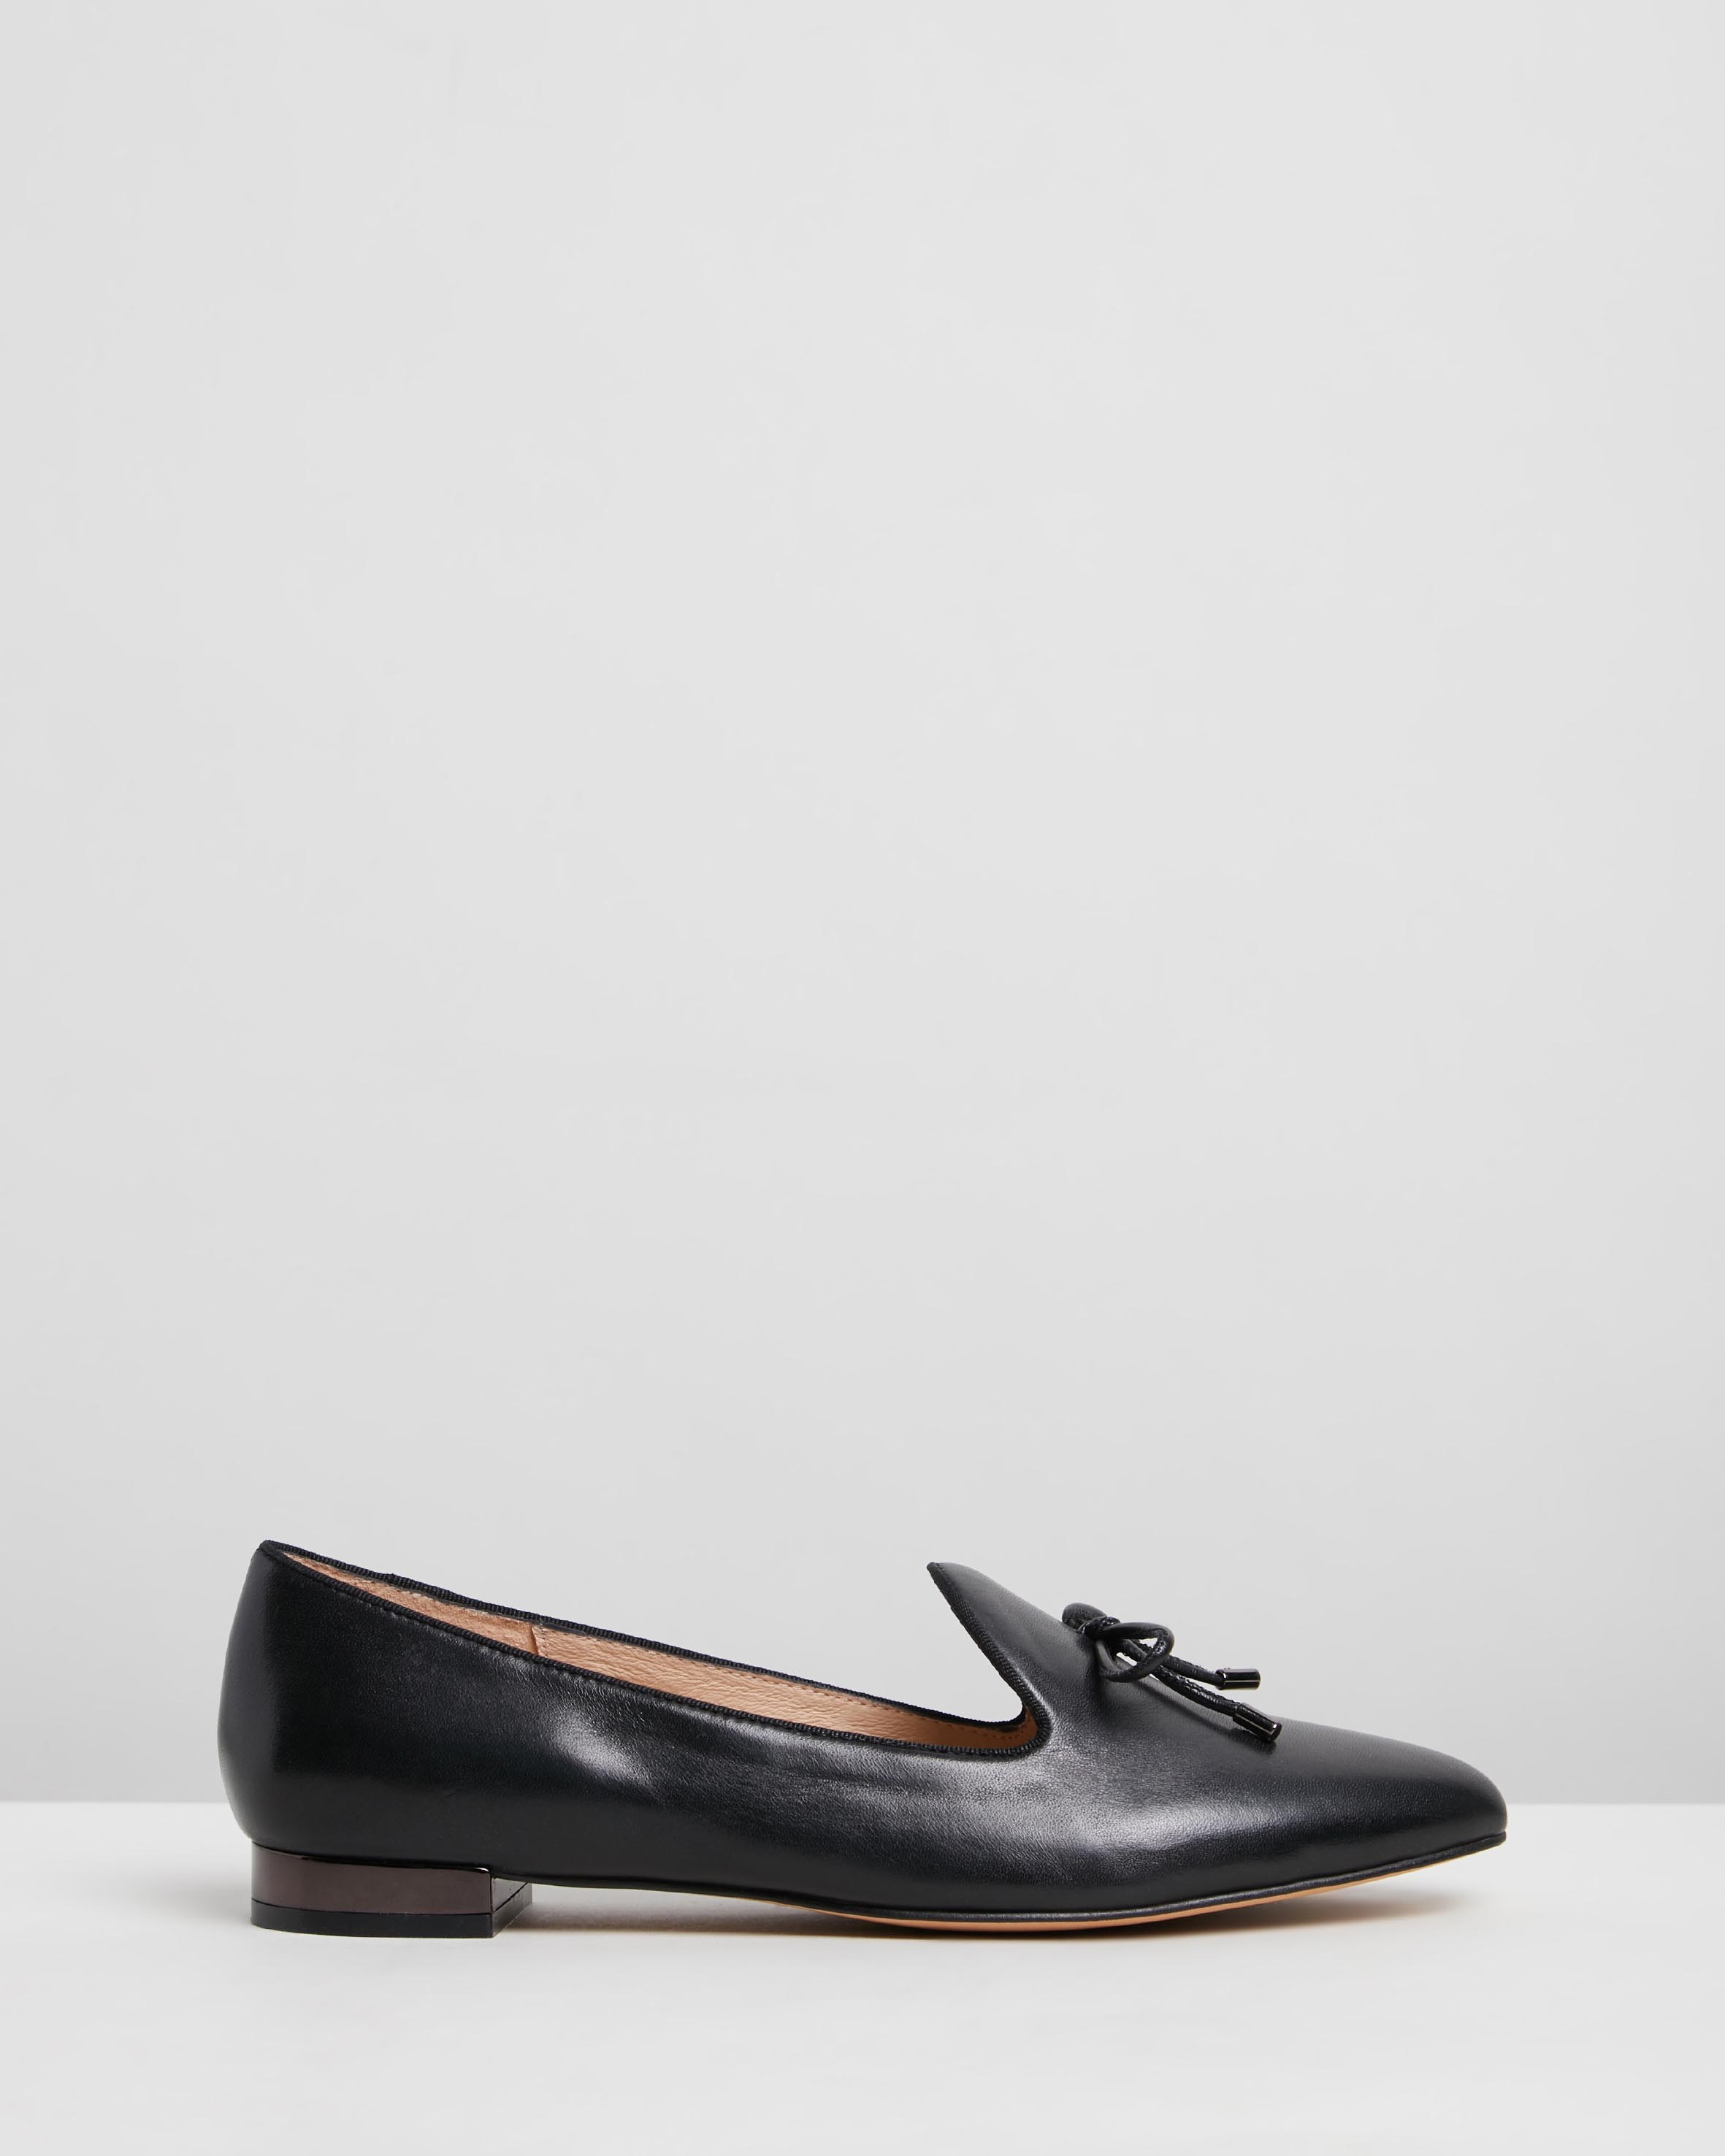 Claudia Loafers Black Leather by Jo Mercer | ShoeSales